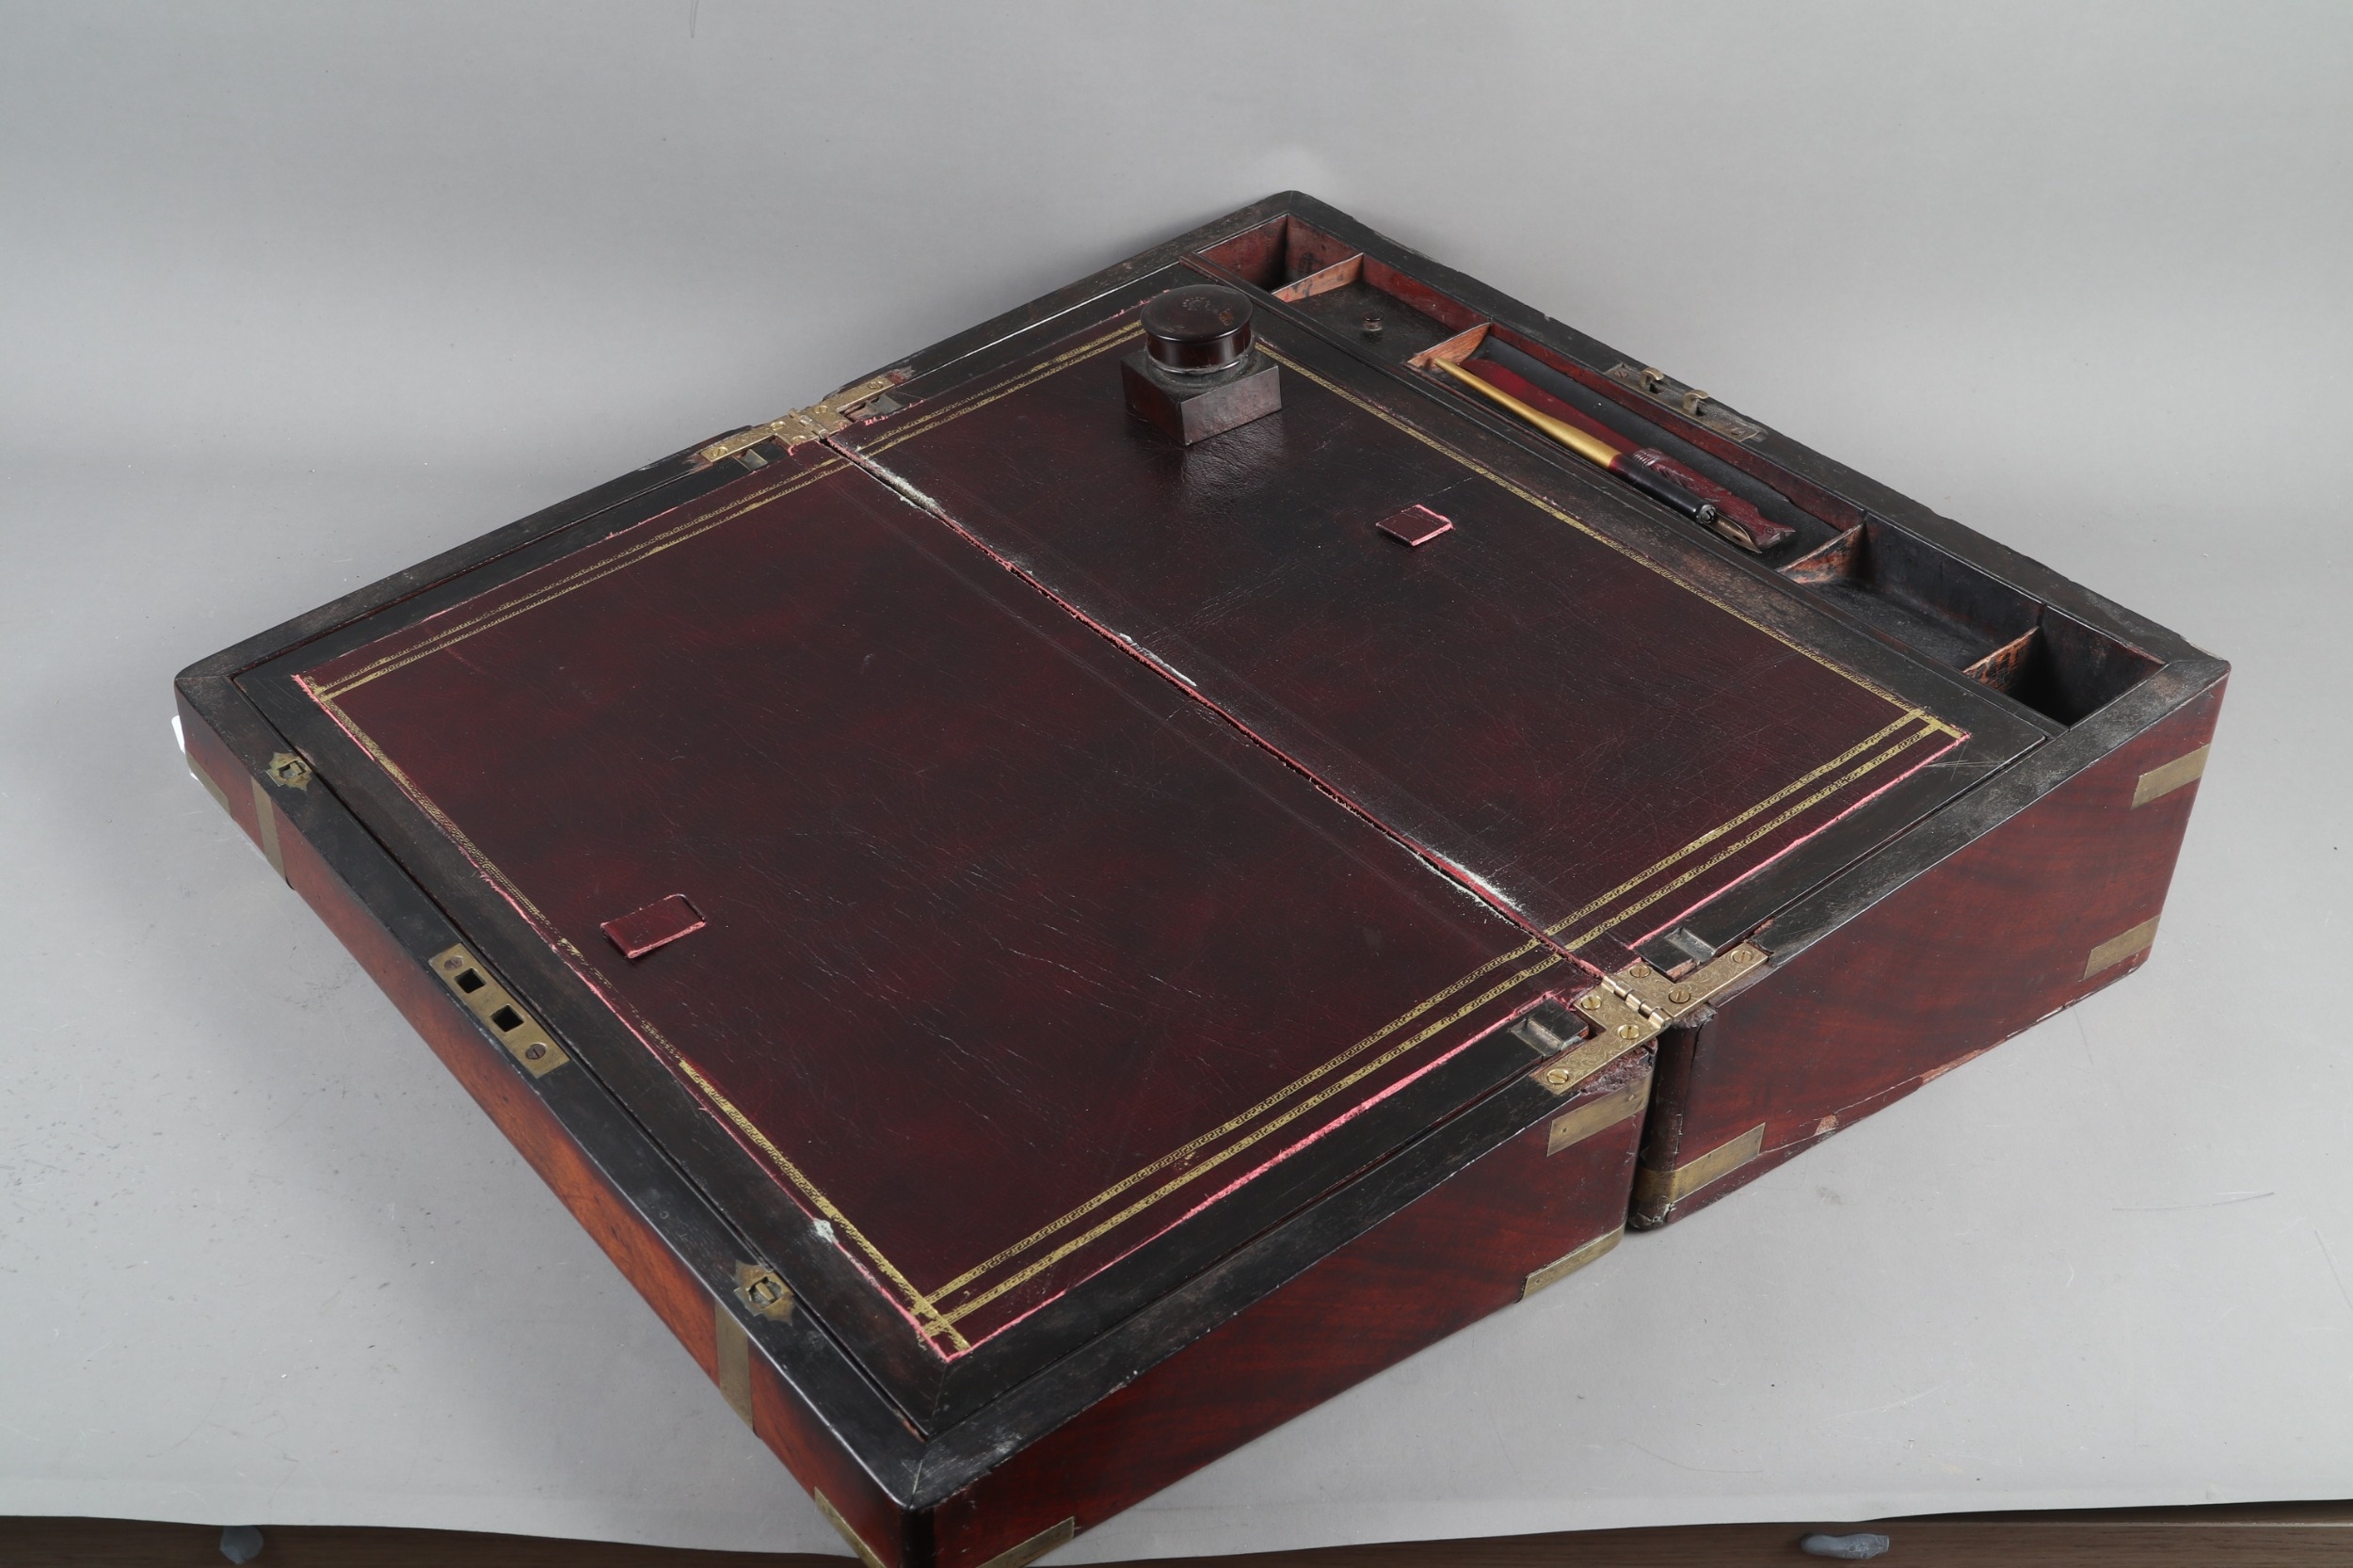 A 19th century mahogany and brass mounted writing box with fitted interior, secret drawers and